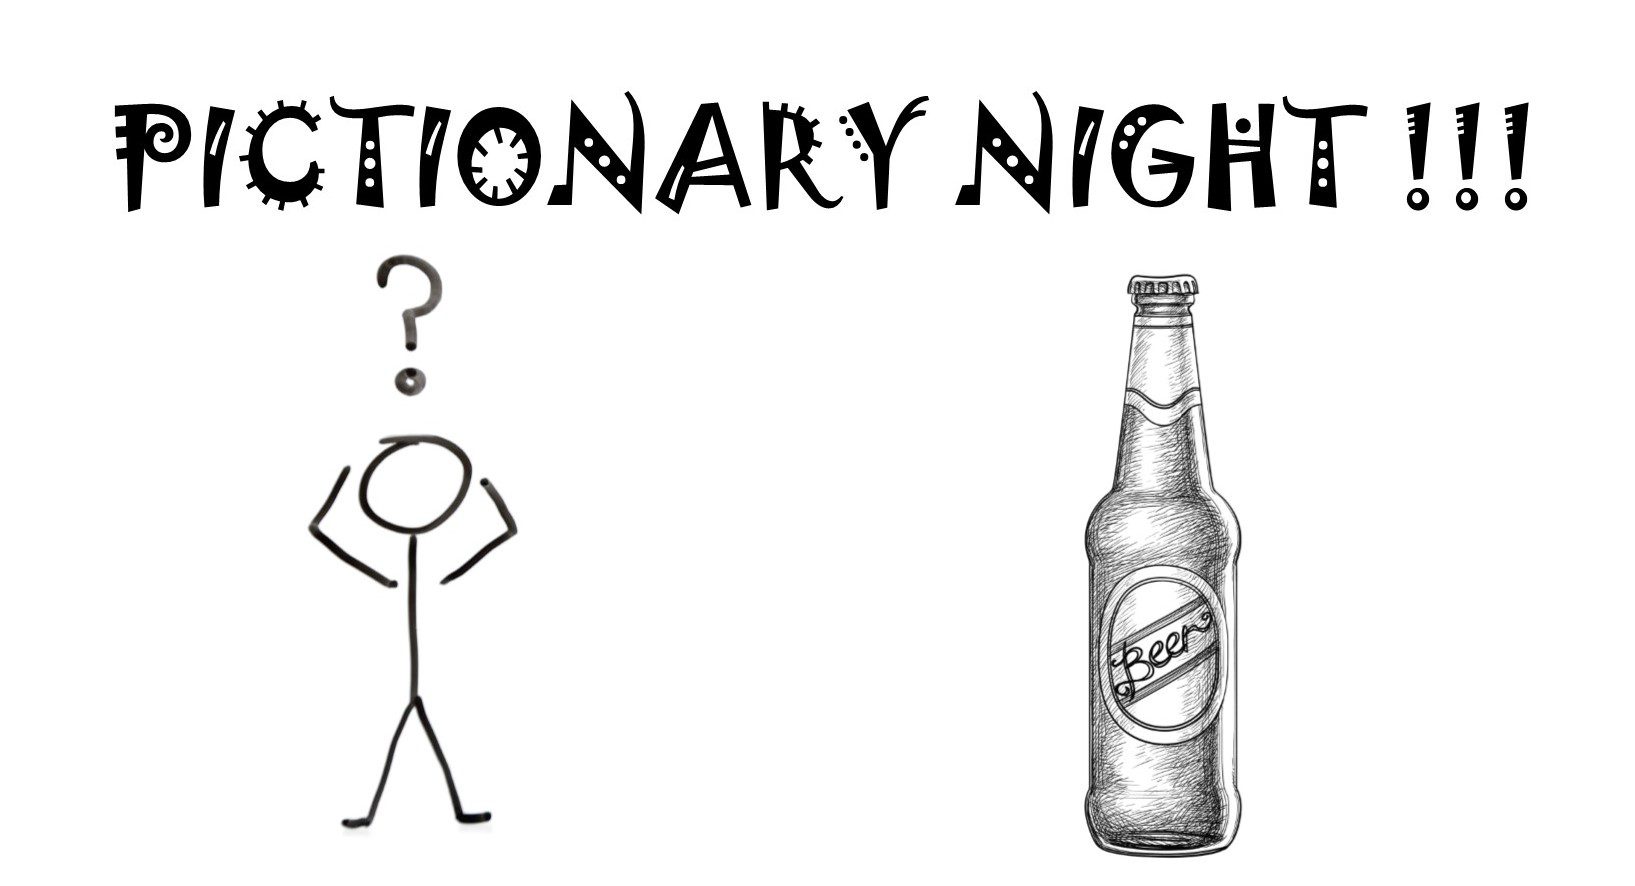 Pictionary night at Bel Aire